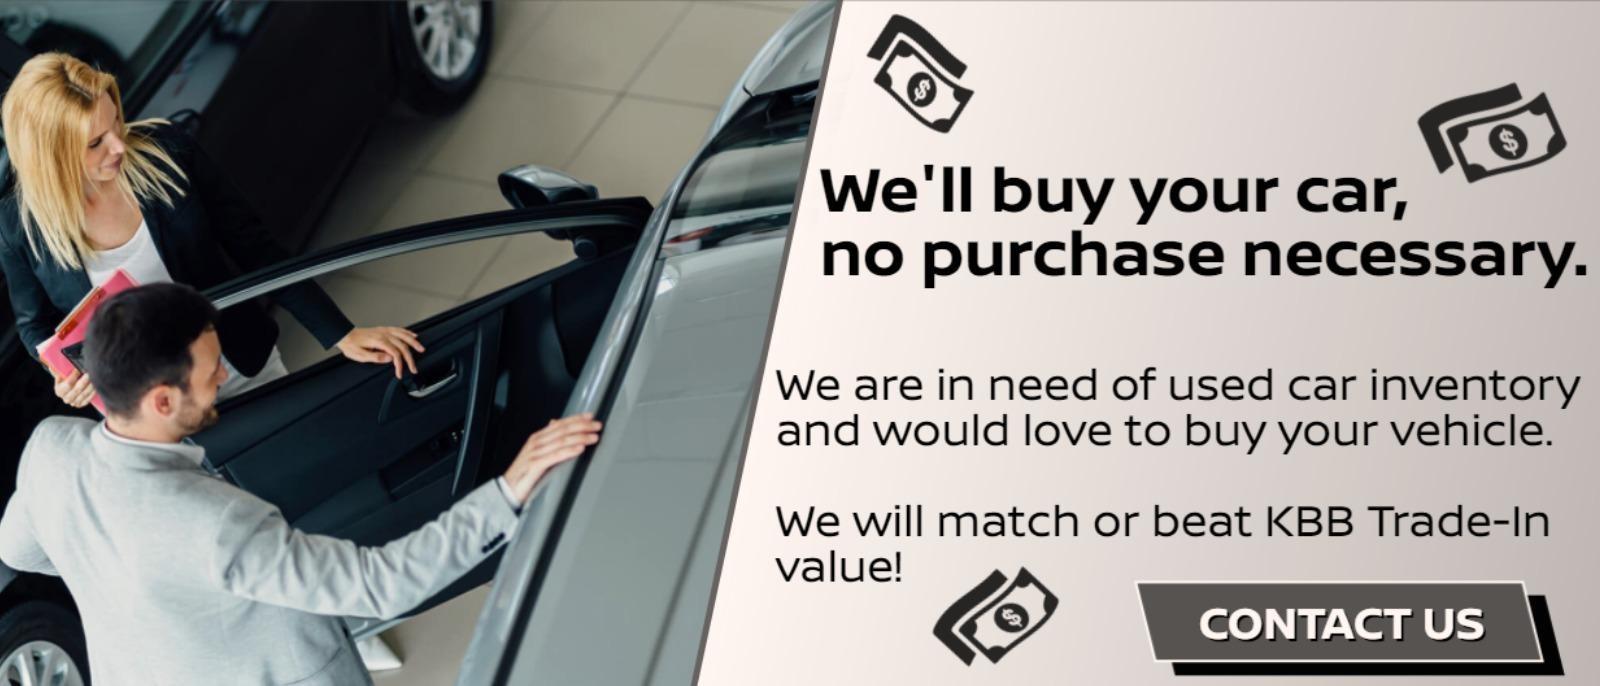 We'll buy your vehicle, no purchase necessary